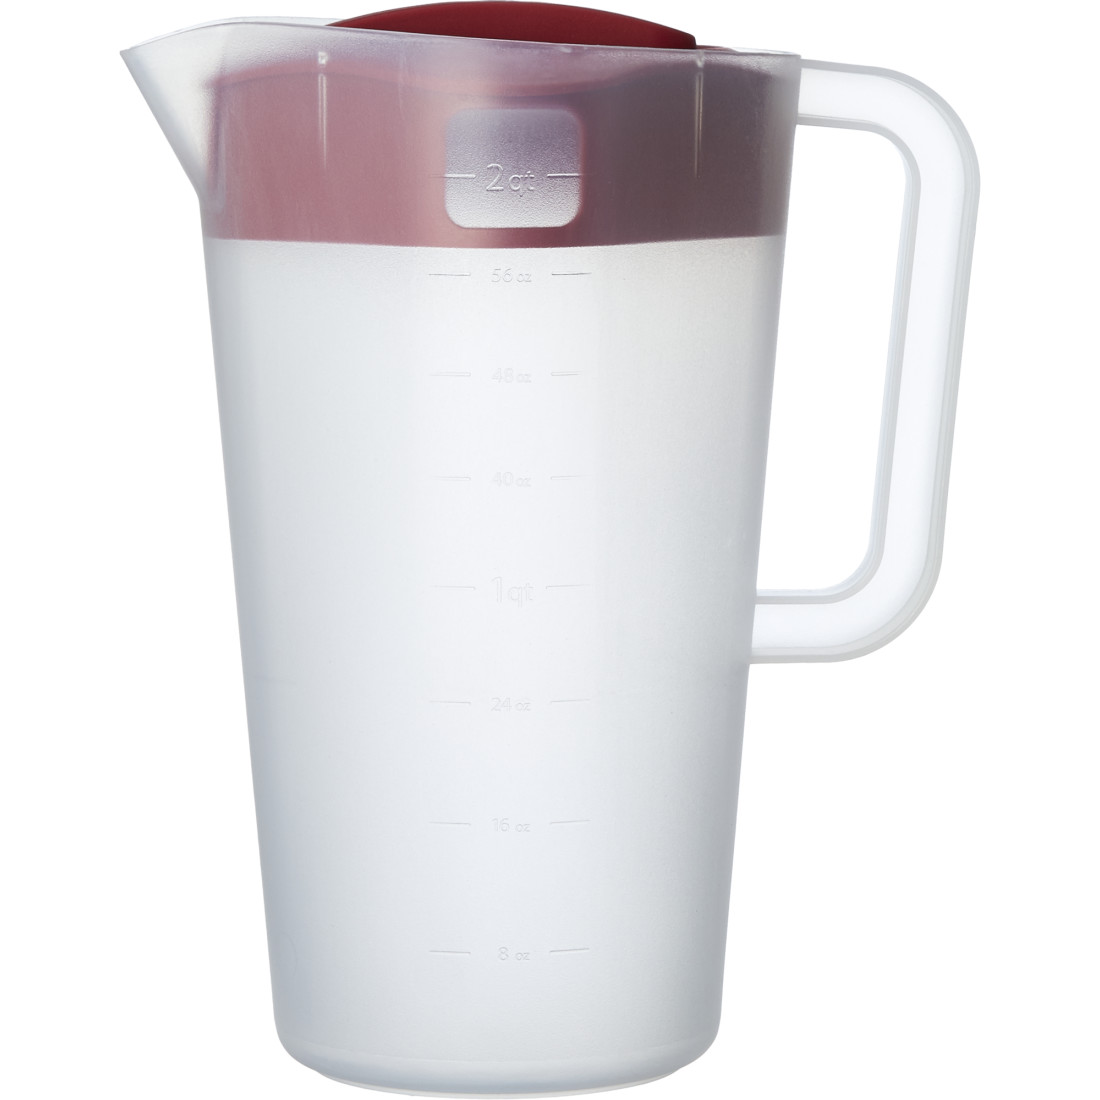 Rubbermaid Covered Pitcher 2 Qt Pitcher Red Lid